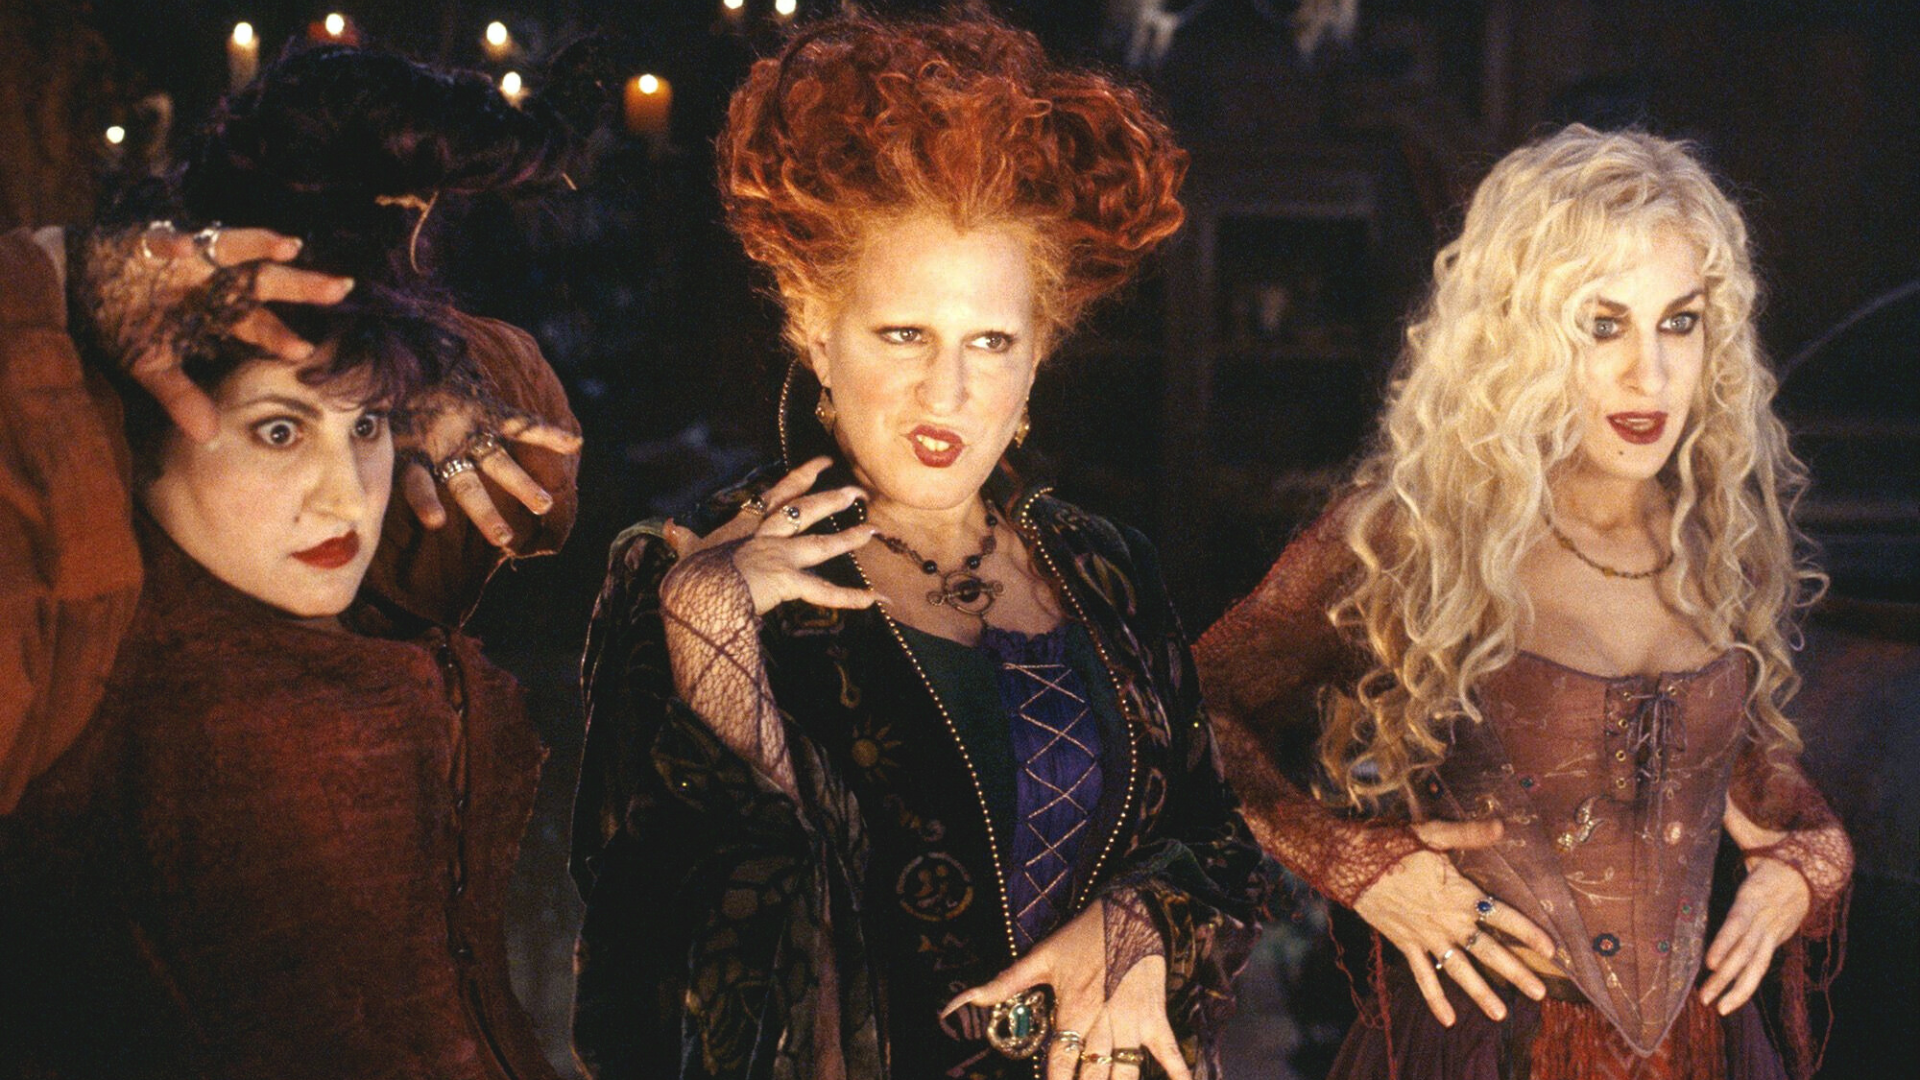 Hocus Pocus (1993) Quotes - Witchy Hocus Pocus (1993) Quotes From The Spooky Sanderson Sisters